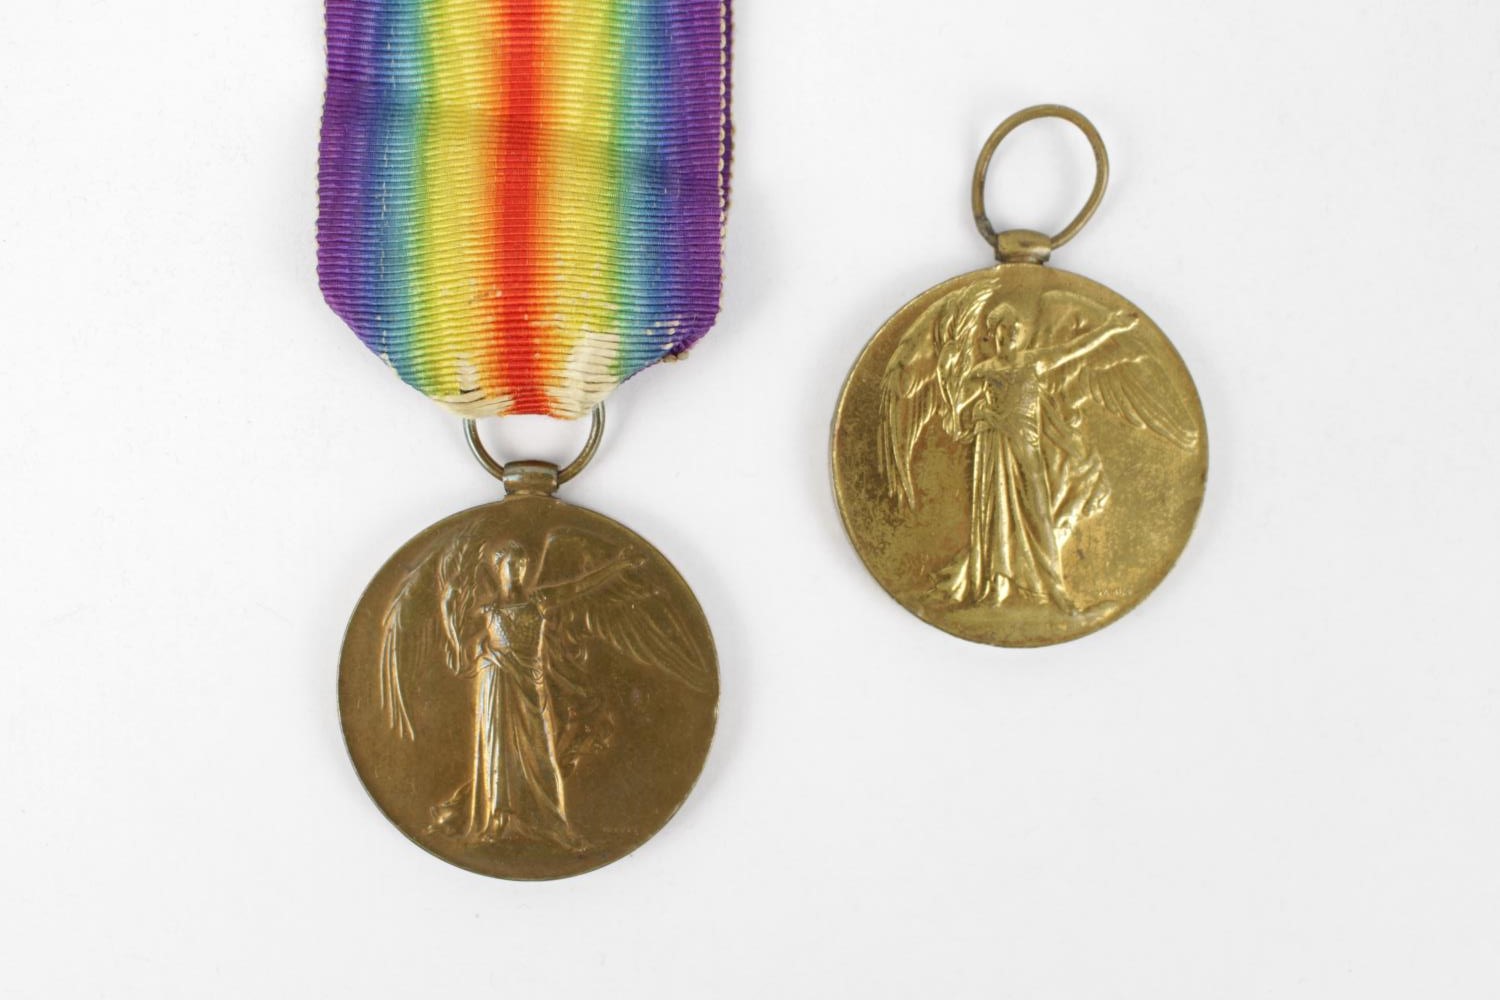 2 WW1 Victory Medals for 27190 PTE J W PROTHEROS NORTH D FUSILIERS & PLY 13360 H G WILCOX RMLI